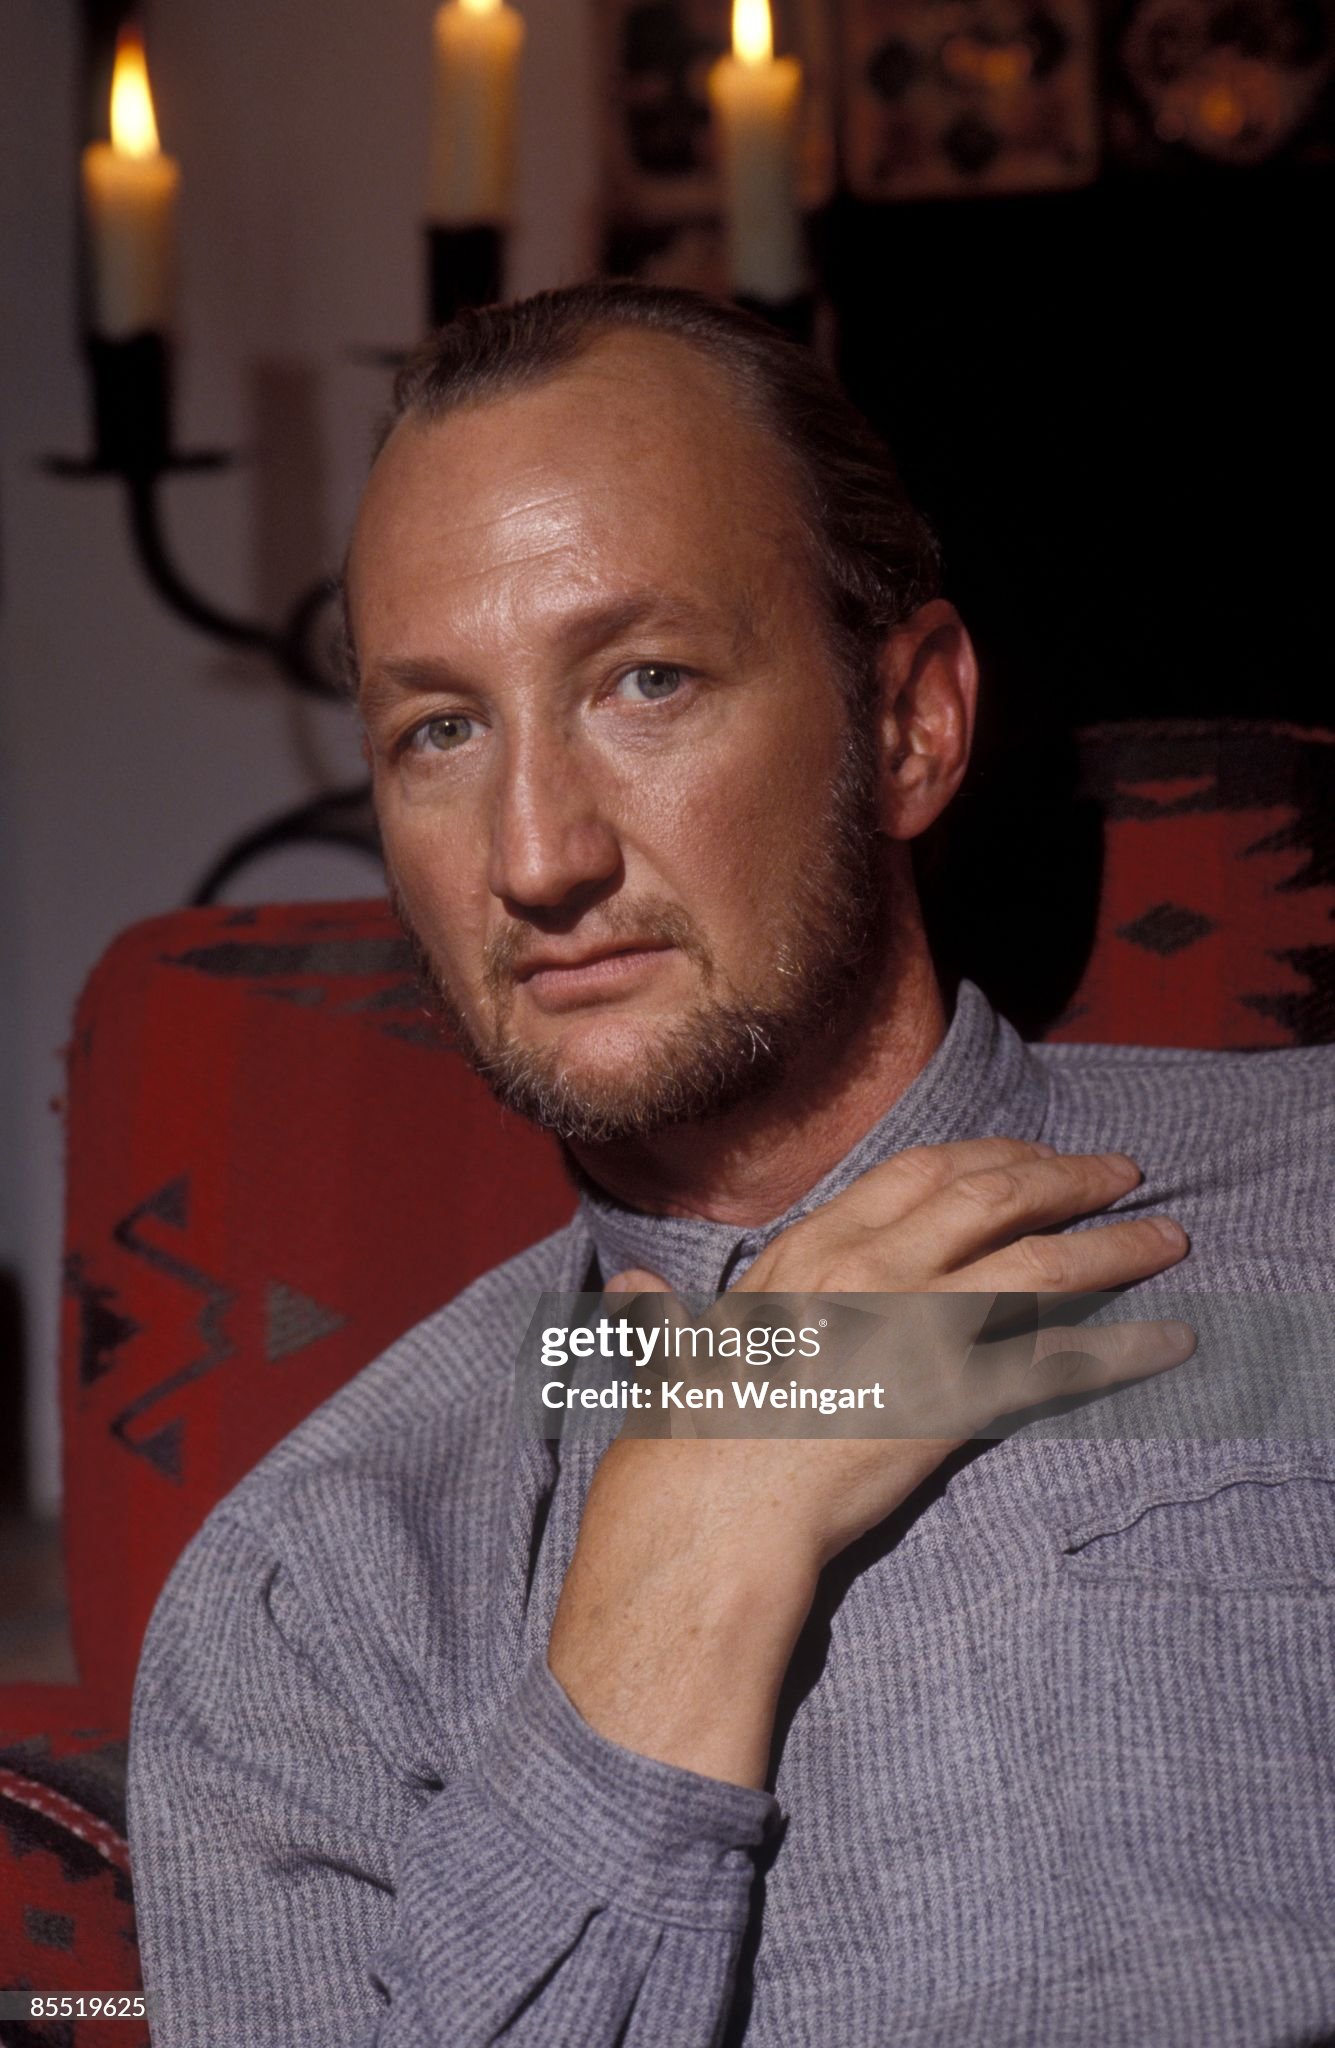 ¿Cuánto mide Robert Englund? - Altura - Real height Los-angeles-actor-robert-englund-poses-for-a-portrait-in-1991-in-los-angeles-california